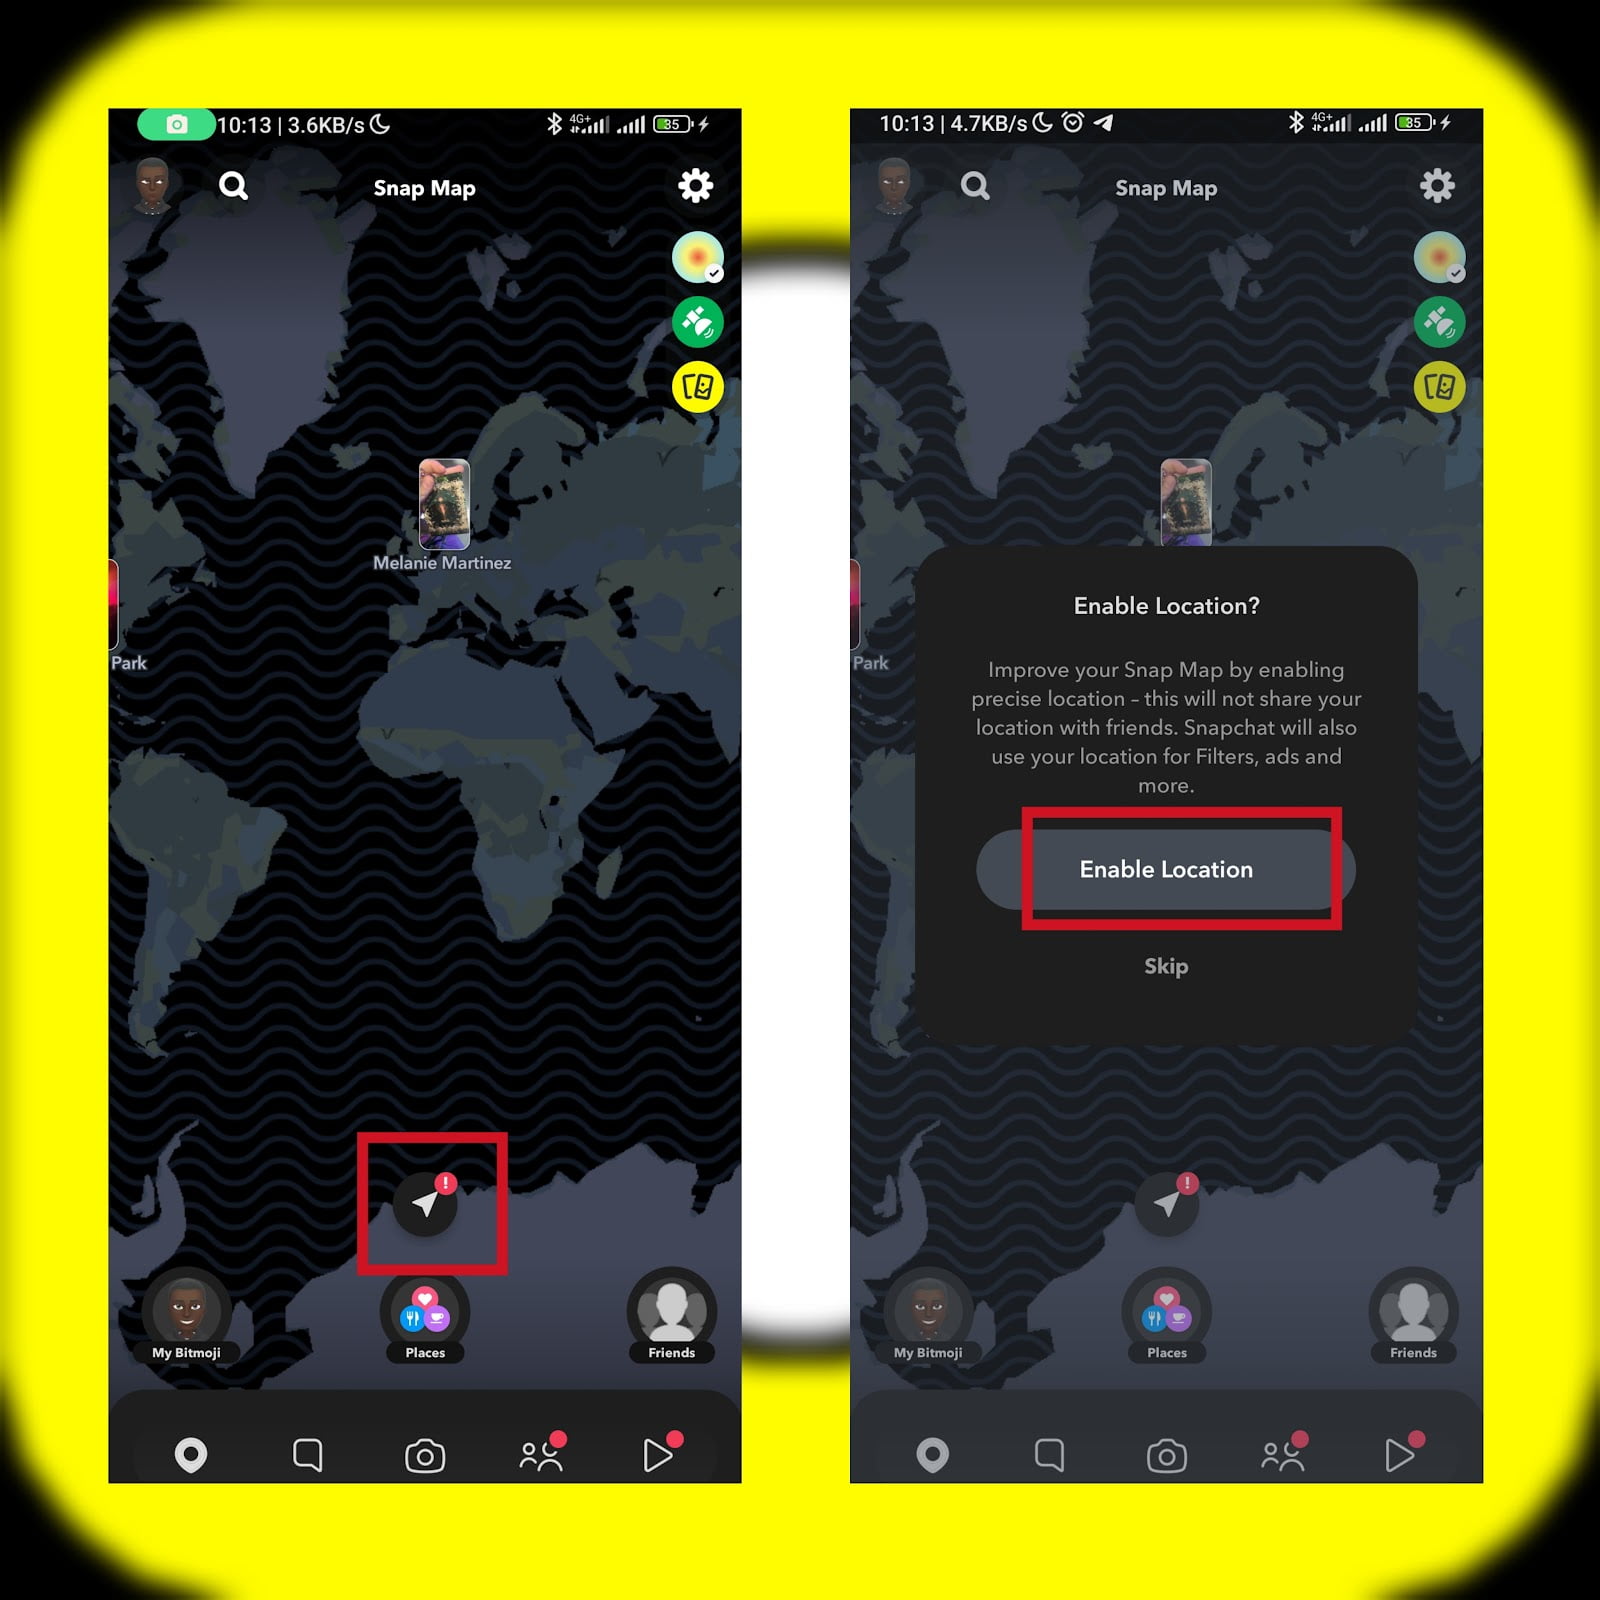 Enable Snapchat Location